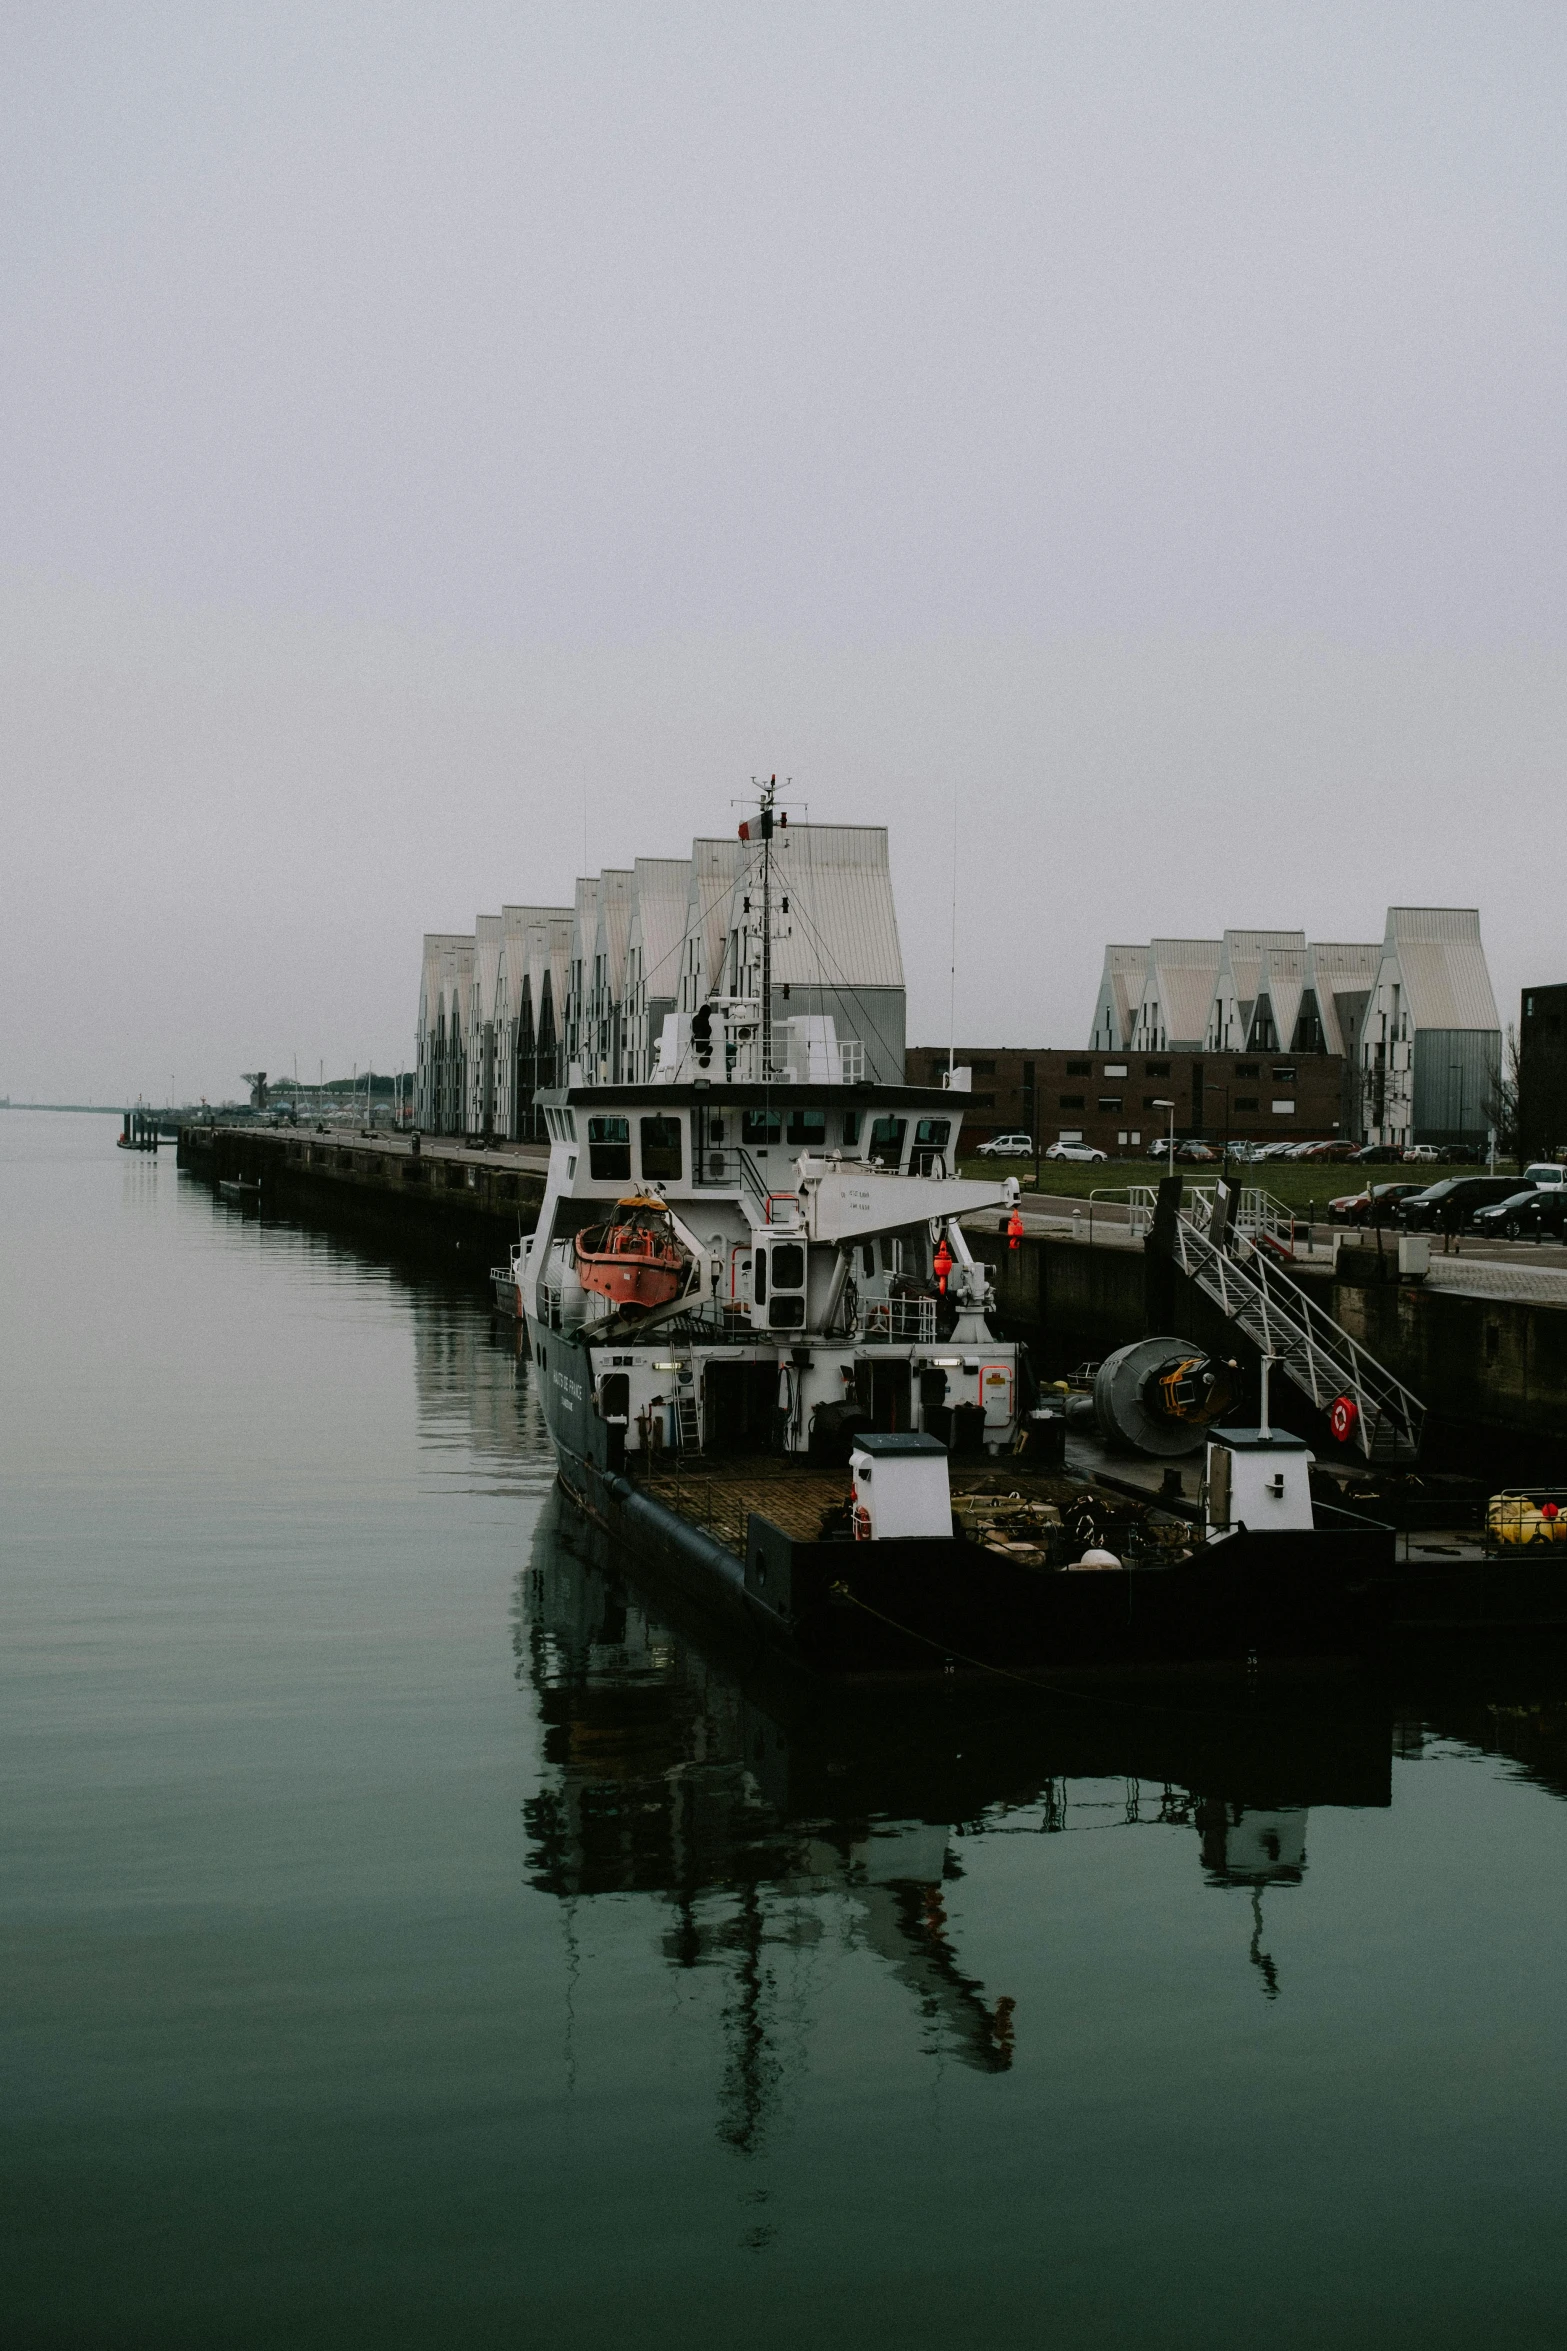 a couple of boats that are sitting in the water, industrial aesthetic, gray sky, high res photograph, 2019 trending photo